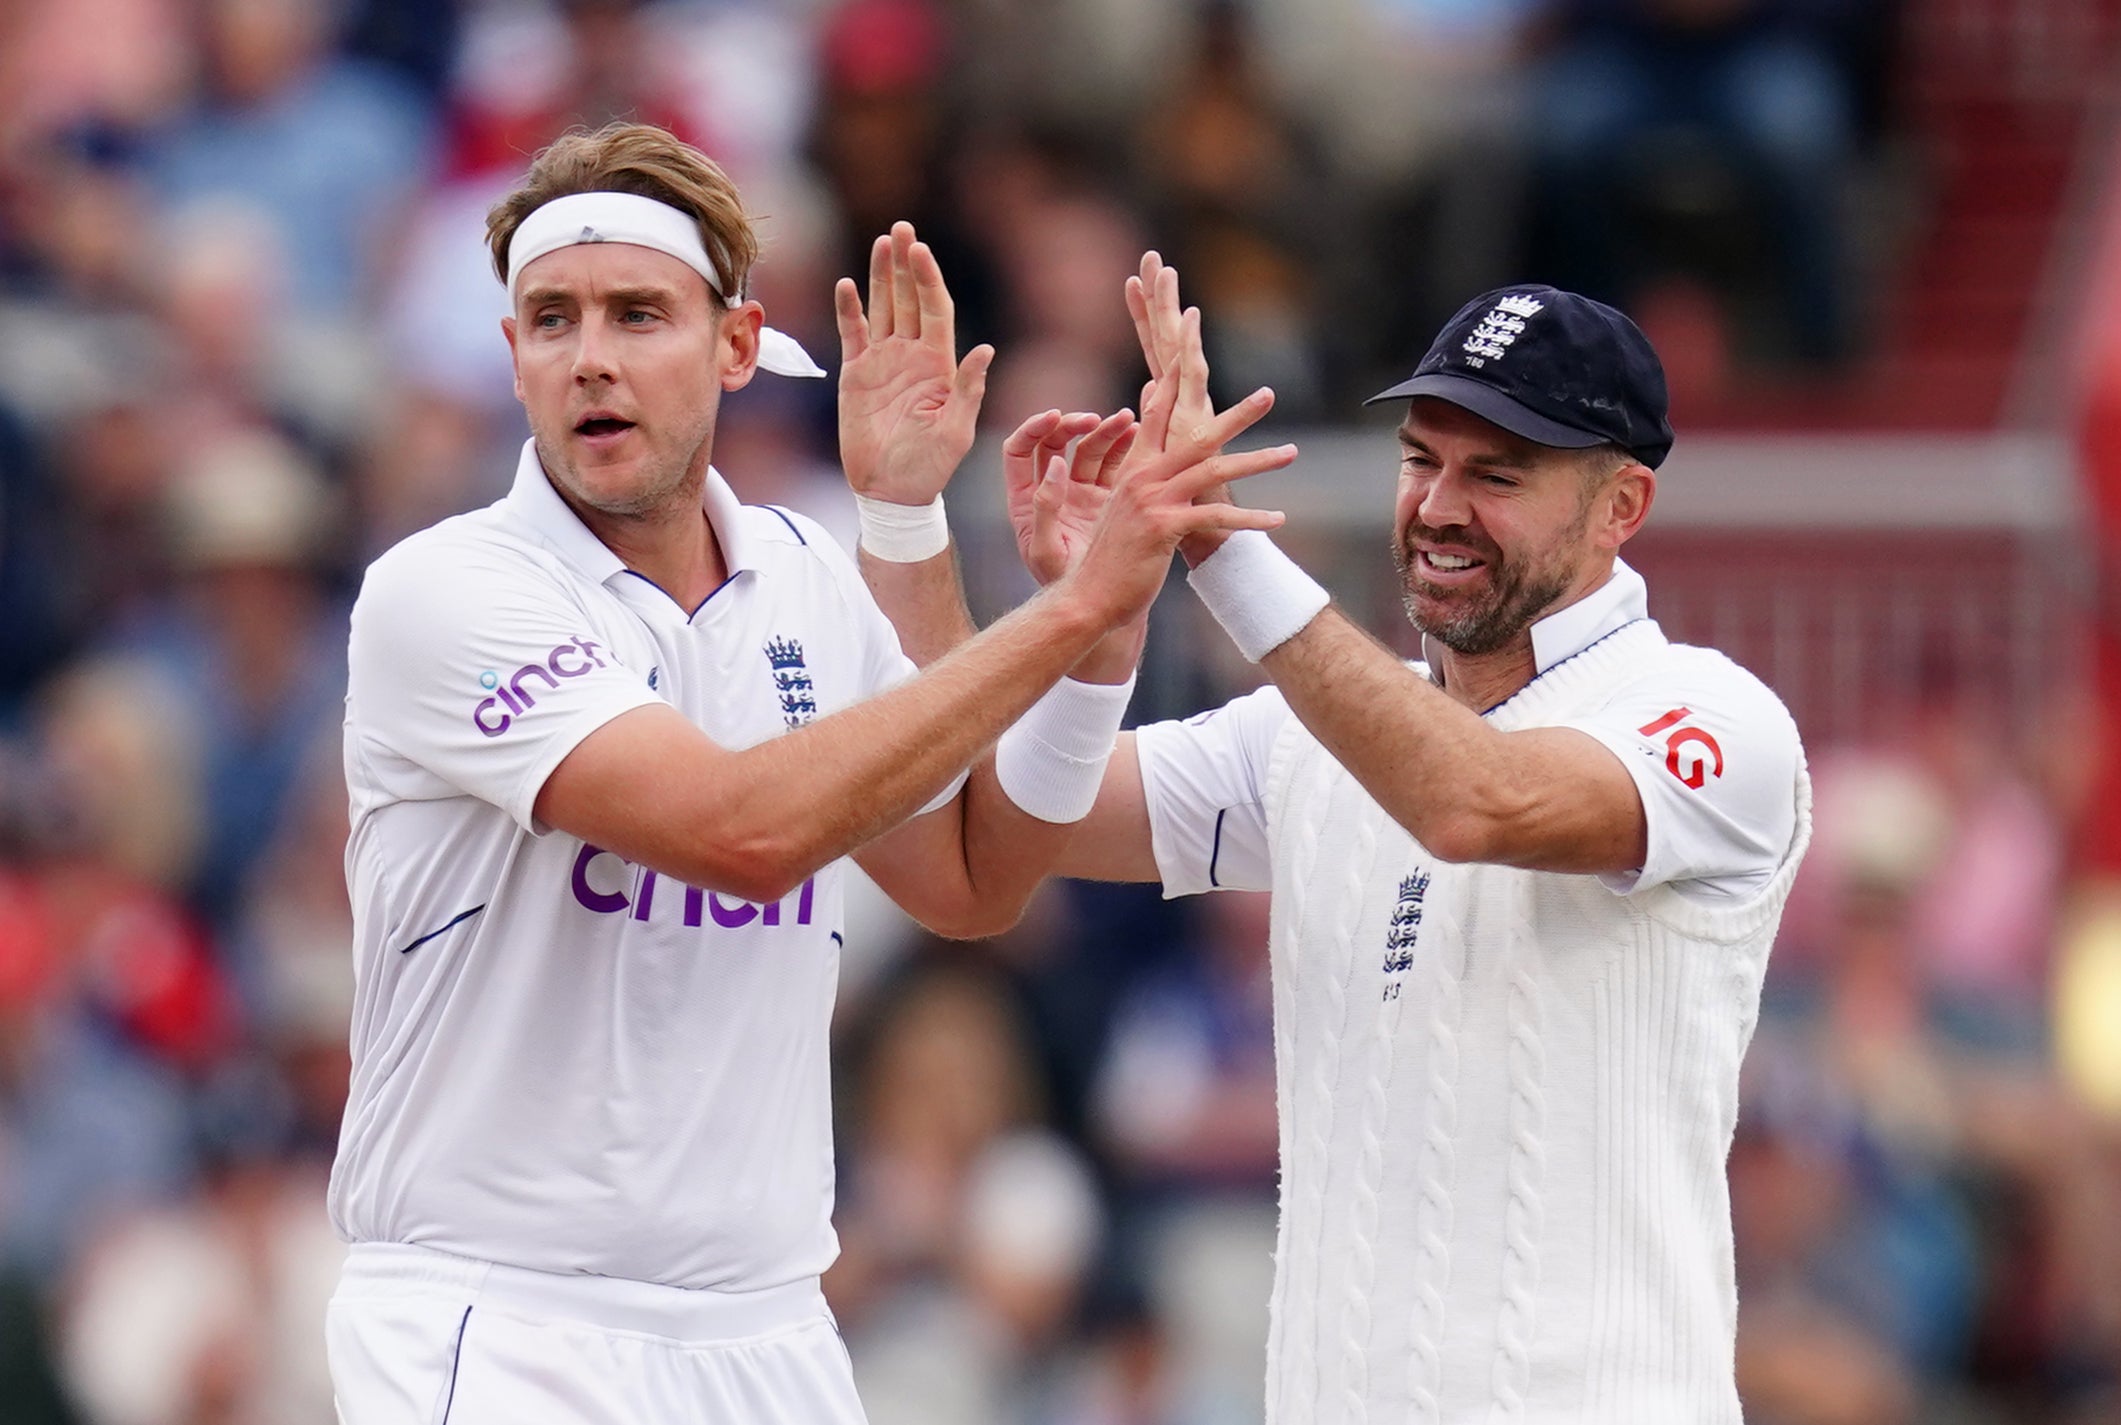 James Anderson and Stuart Broad’s departures will leave a big hole